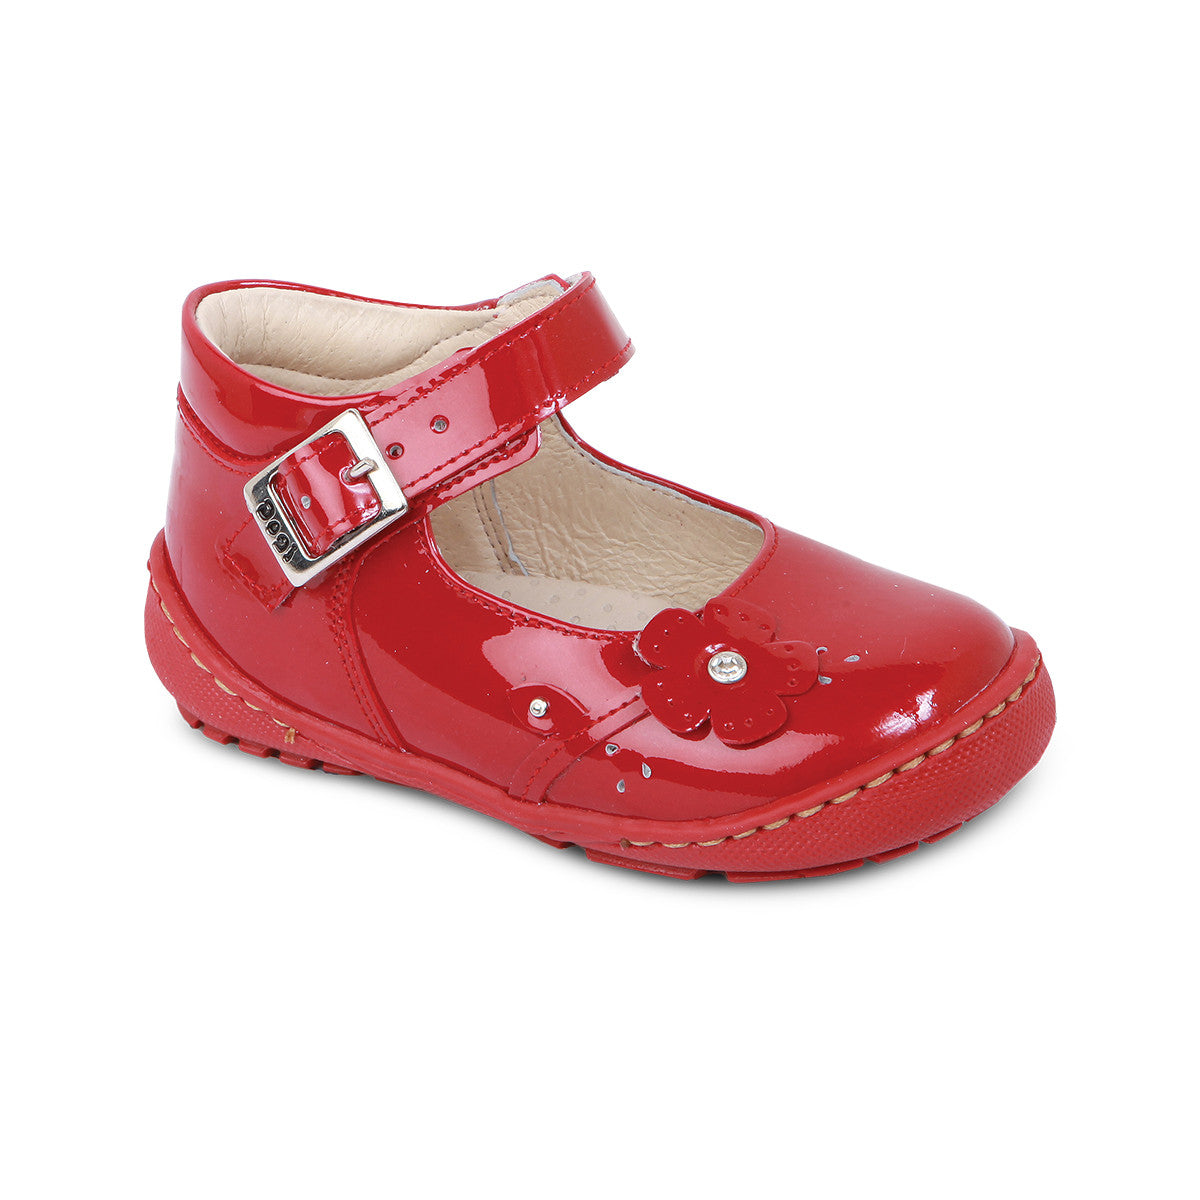 DG-1230 - Ruby Red Patent Leather 